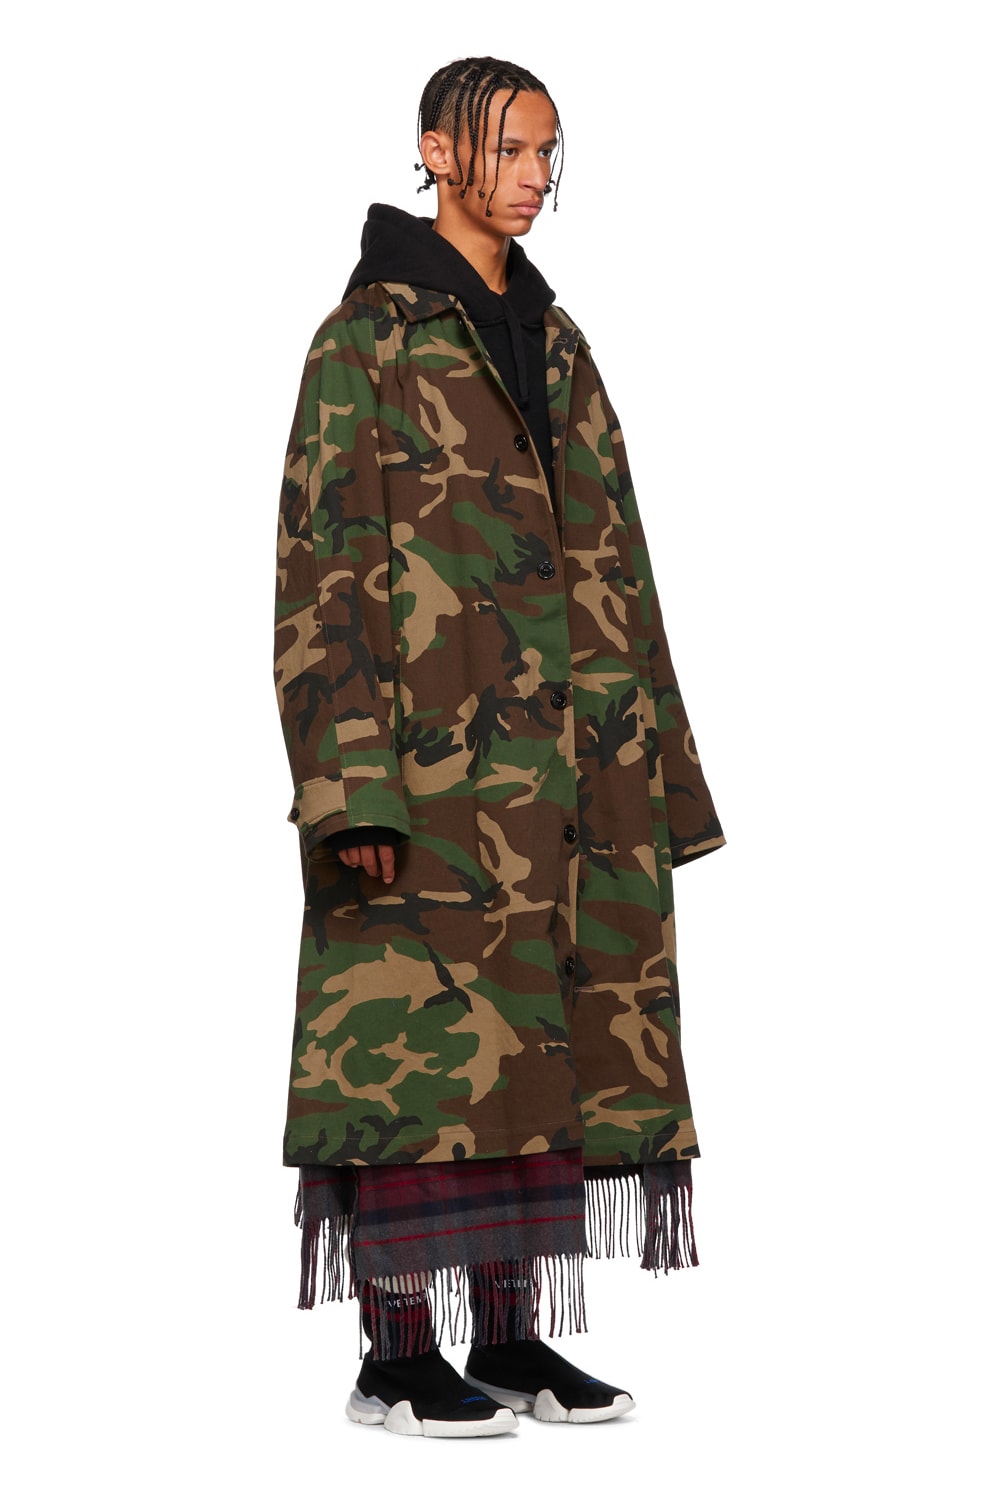 Vetements Fall Winter 2018 Camo Scarf Trench Coat plaid release info jackets military